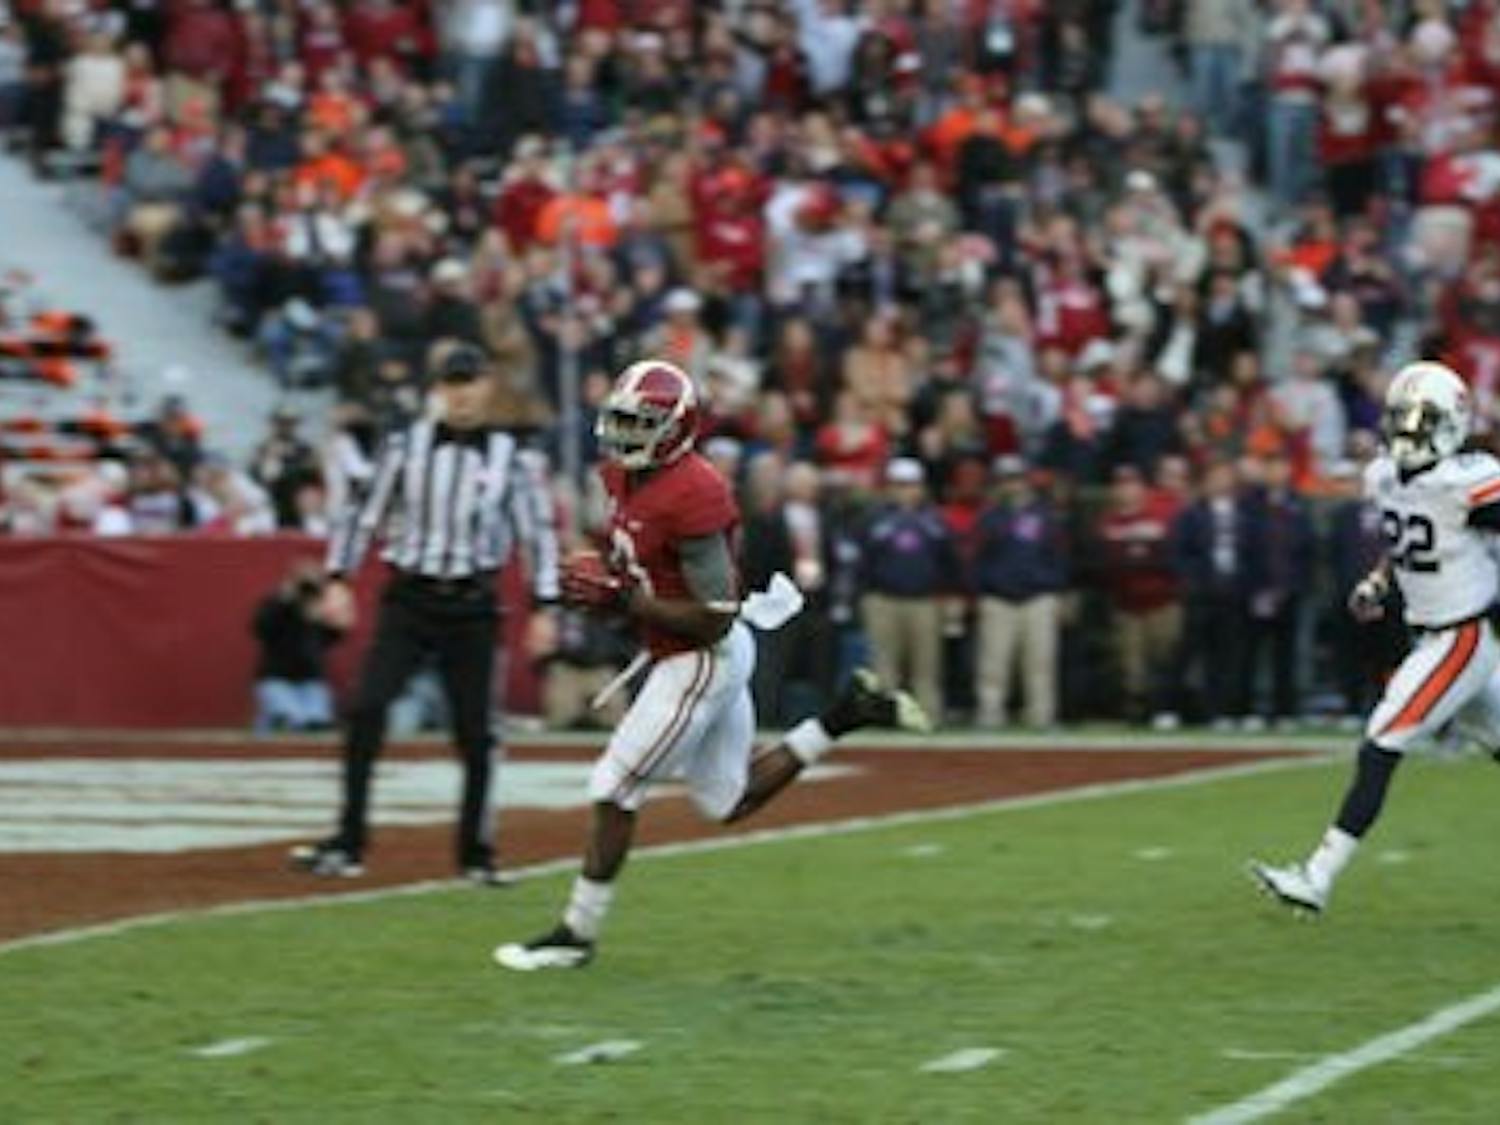 Alabama receiver Amari Cooper hauls in one of his two first half touchdown receptions in the Crimson Tide's 49-0 Iron Bowl rout of Auburn. (Danielle Lowe / ASSISTANT PHOTO EDITOR)